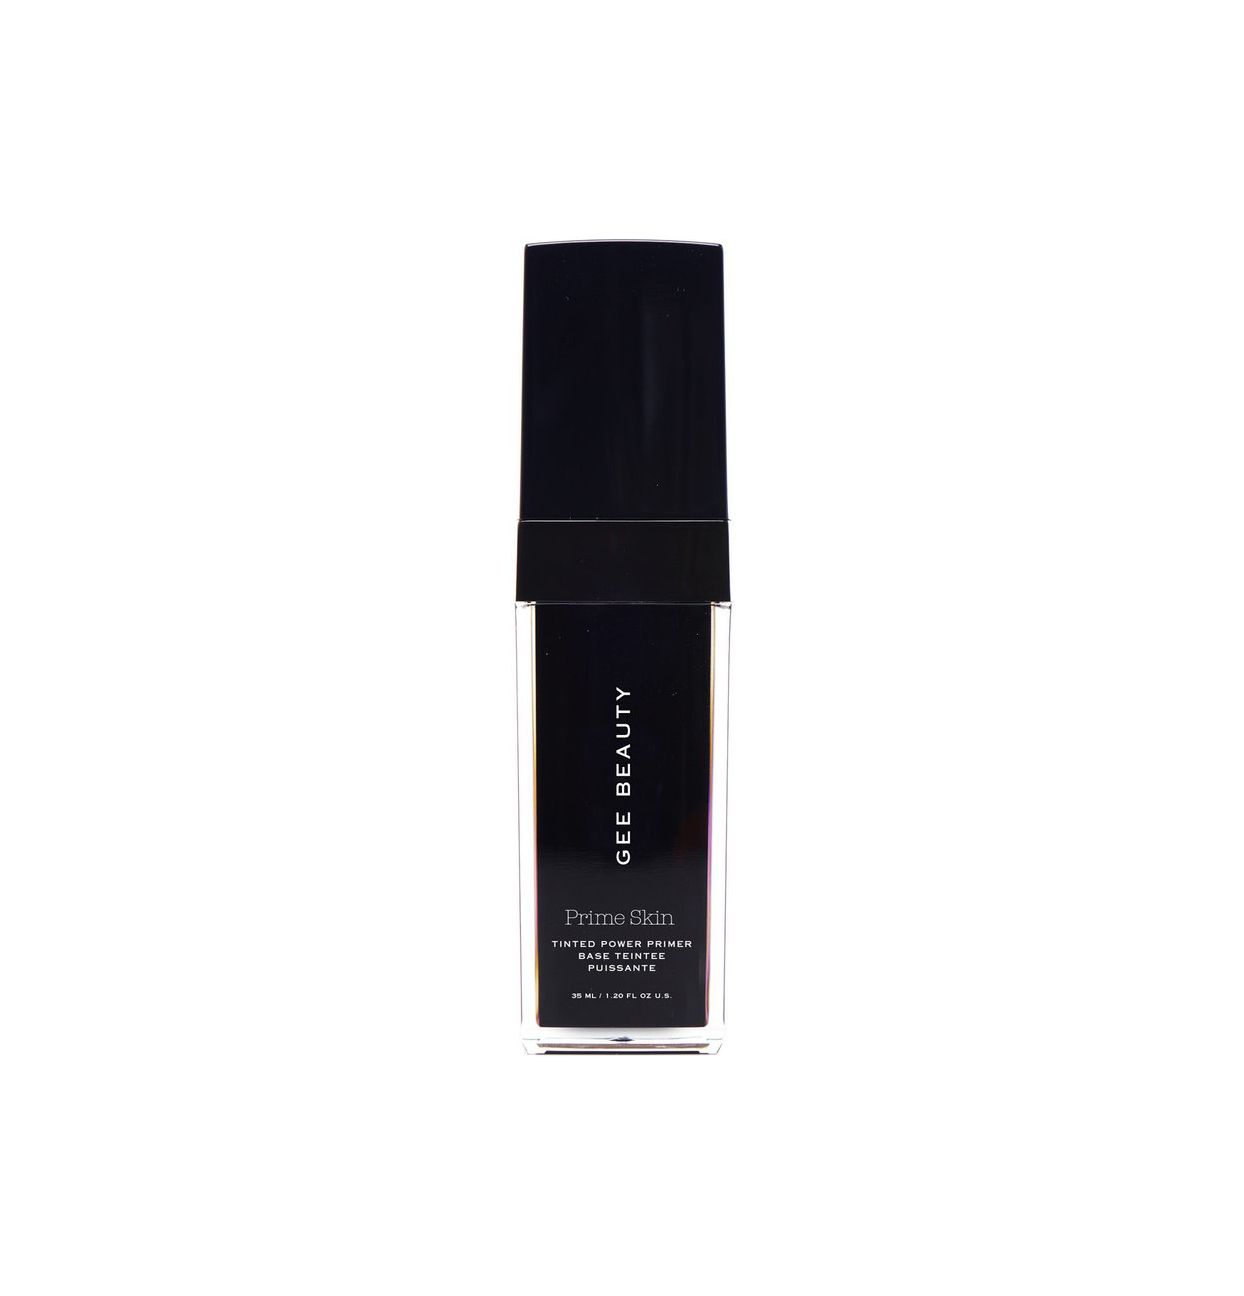 „Gee Beauty Prime Skin Tinted Power Primer“